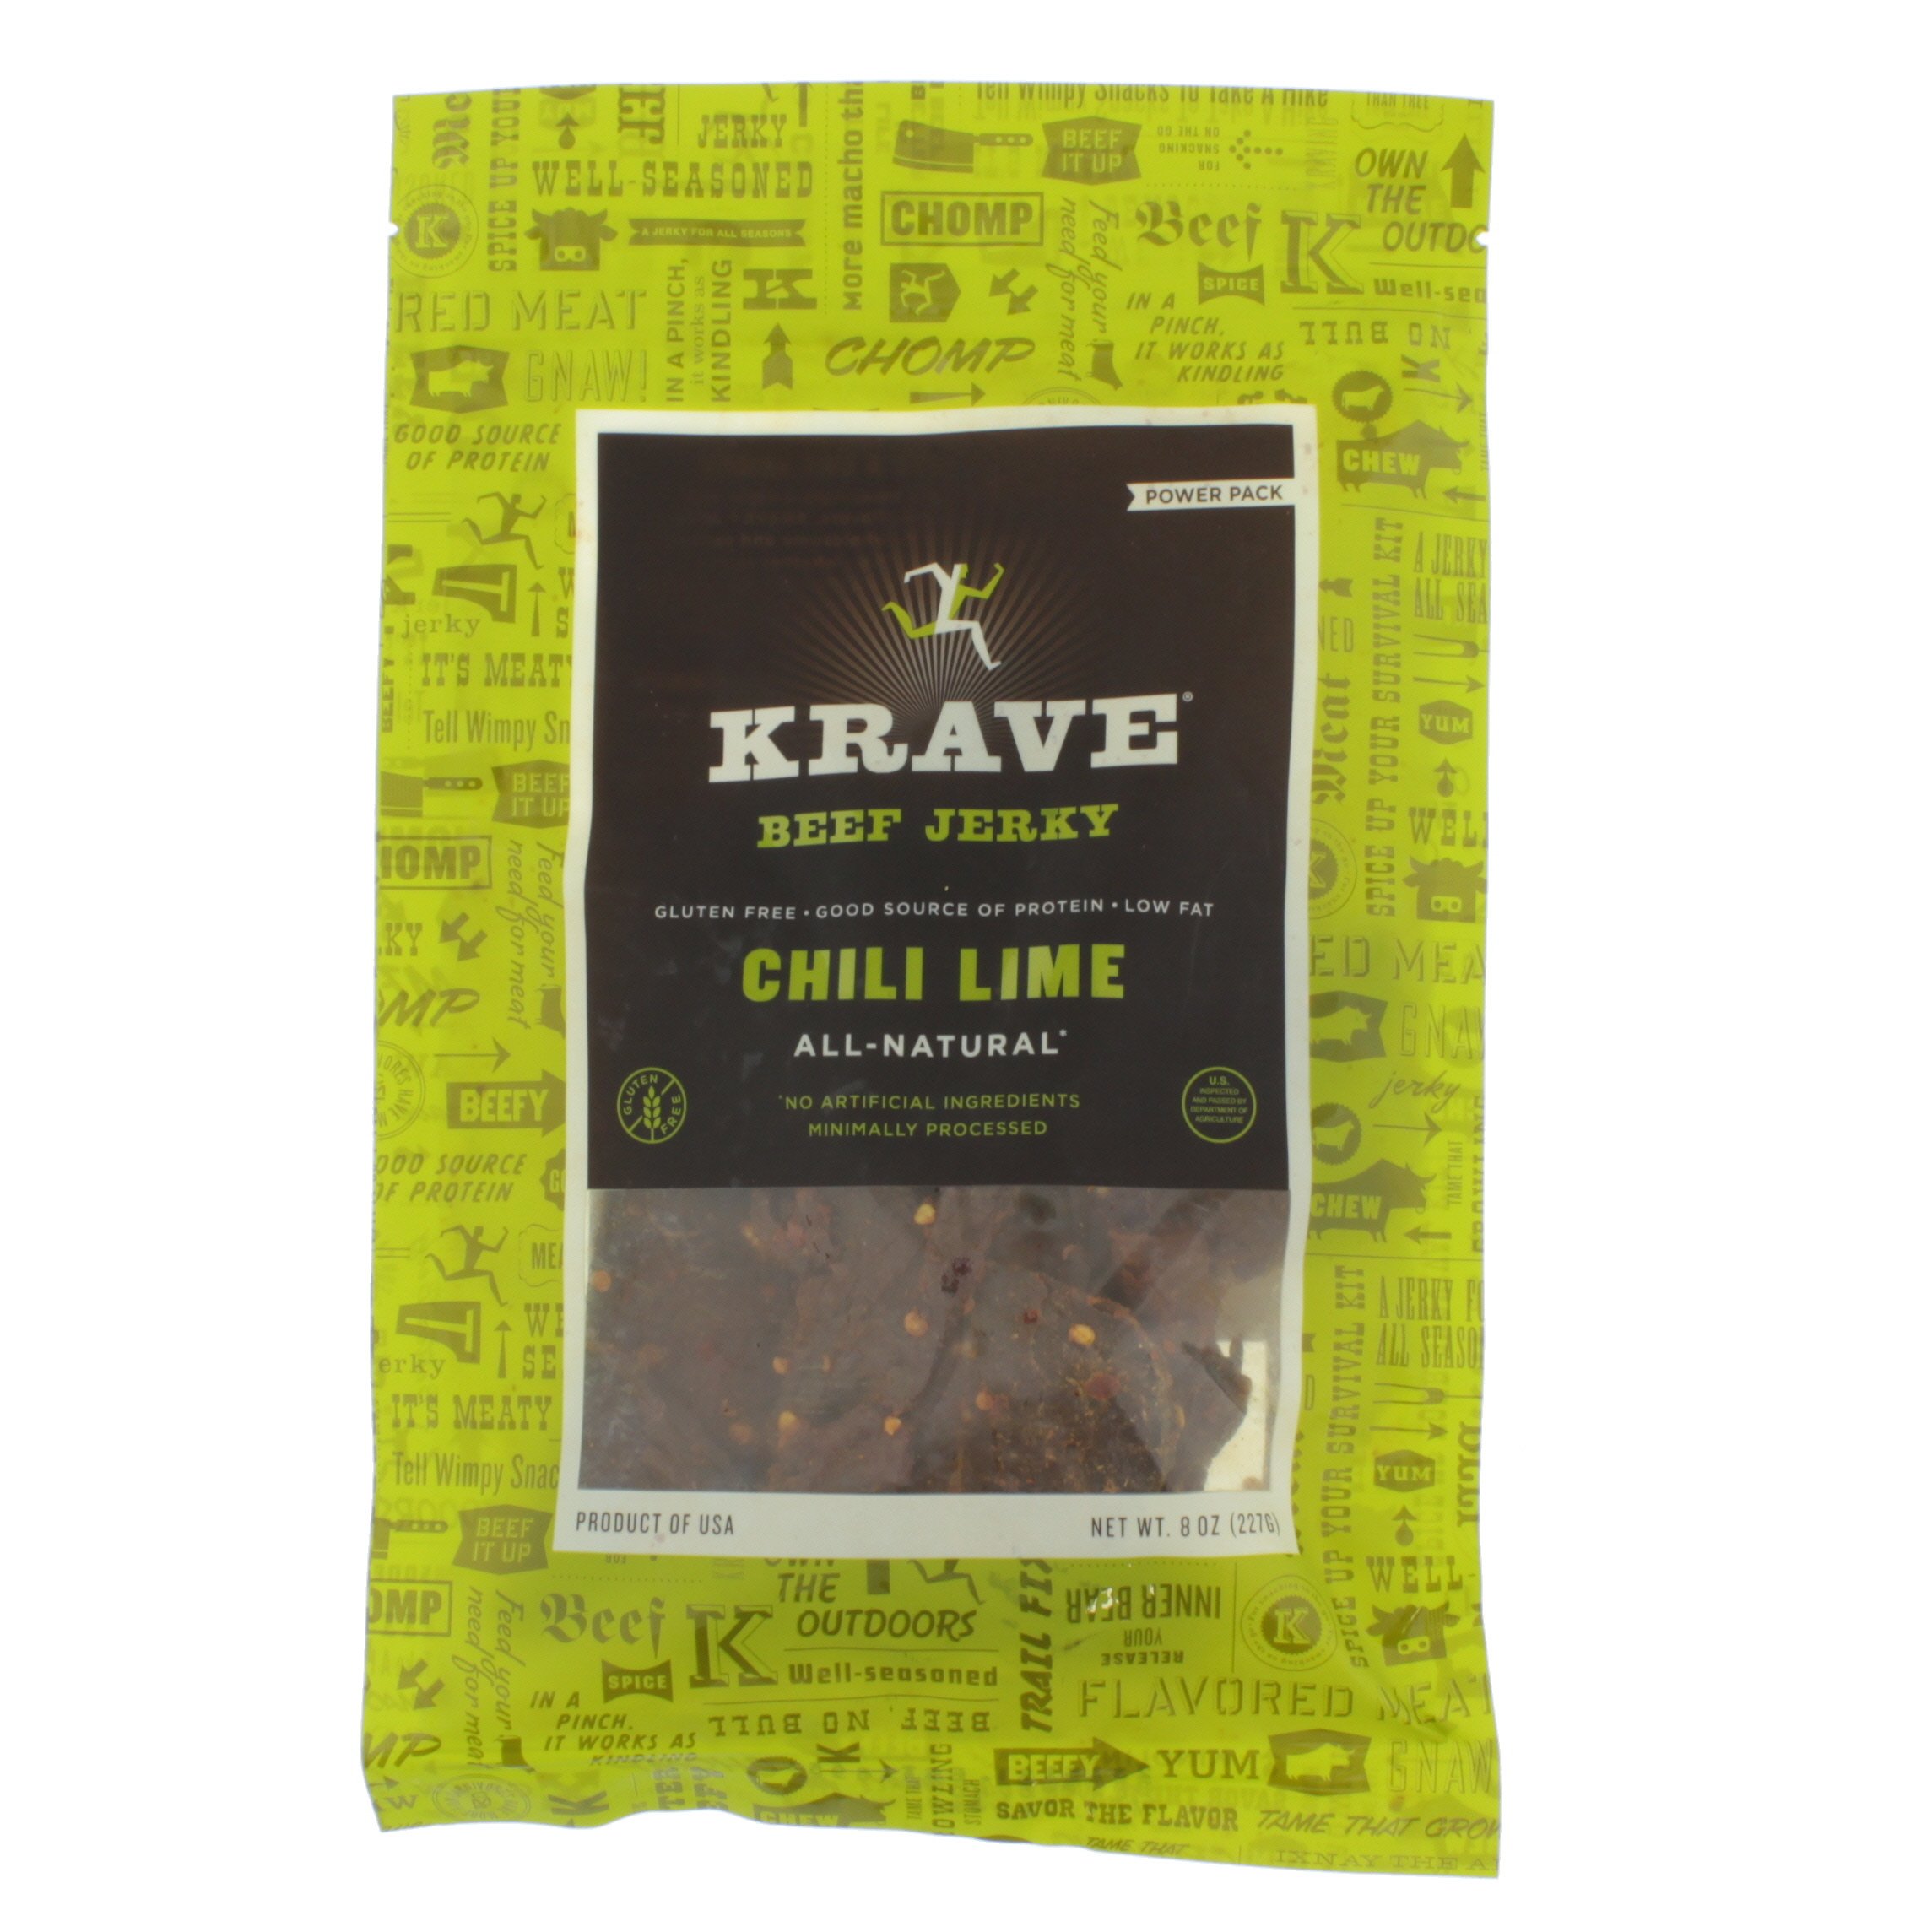 Krave Chili Lime Beef Jerky, All-Natural - Shop Jerky at H-E-B